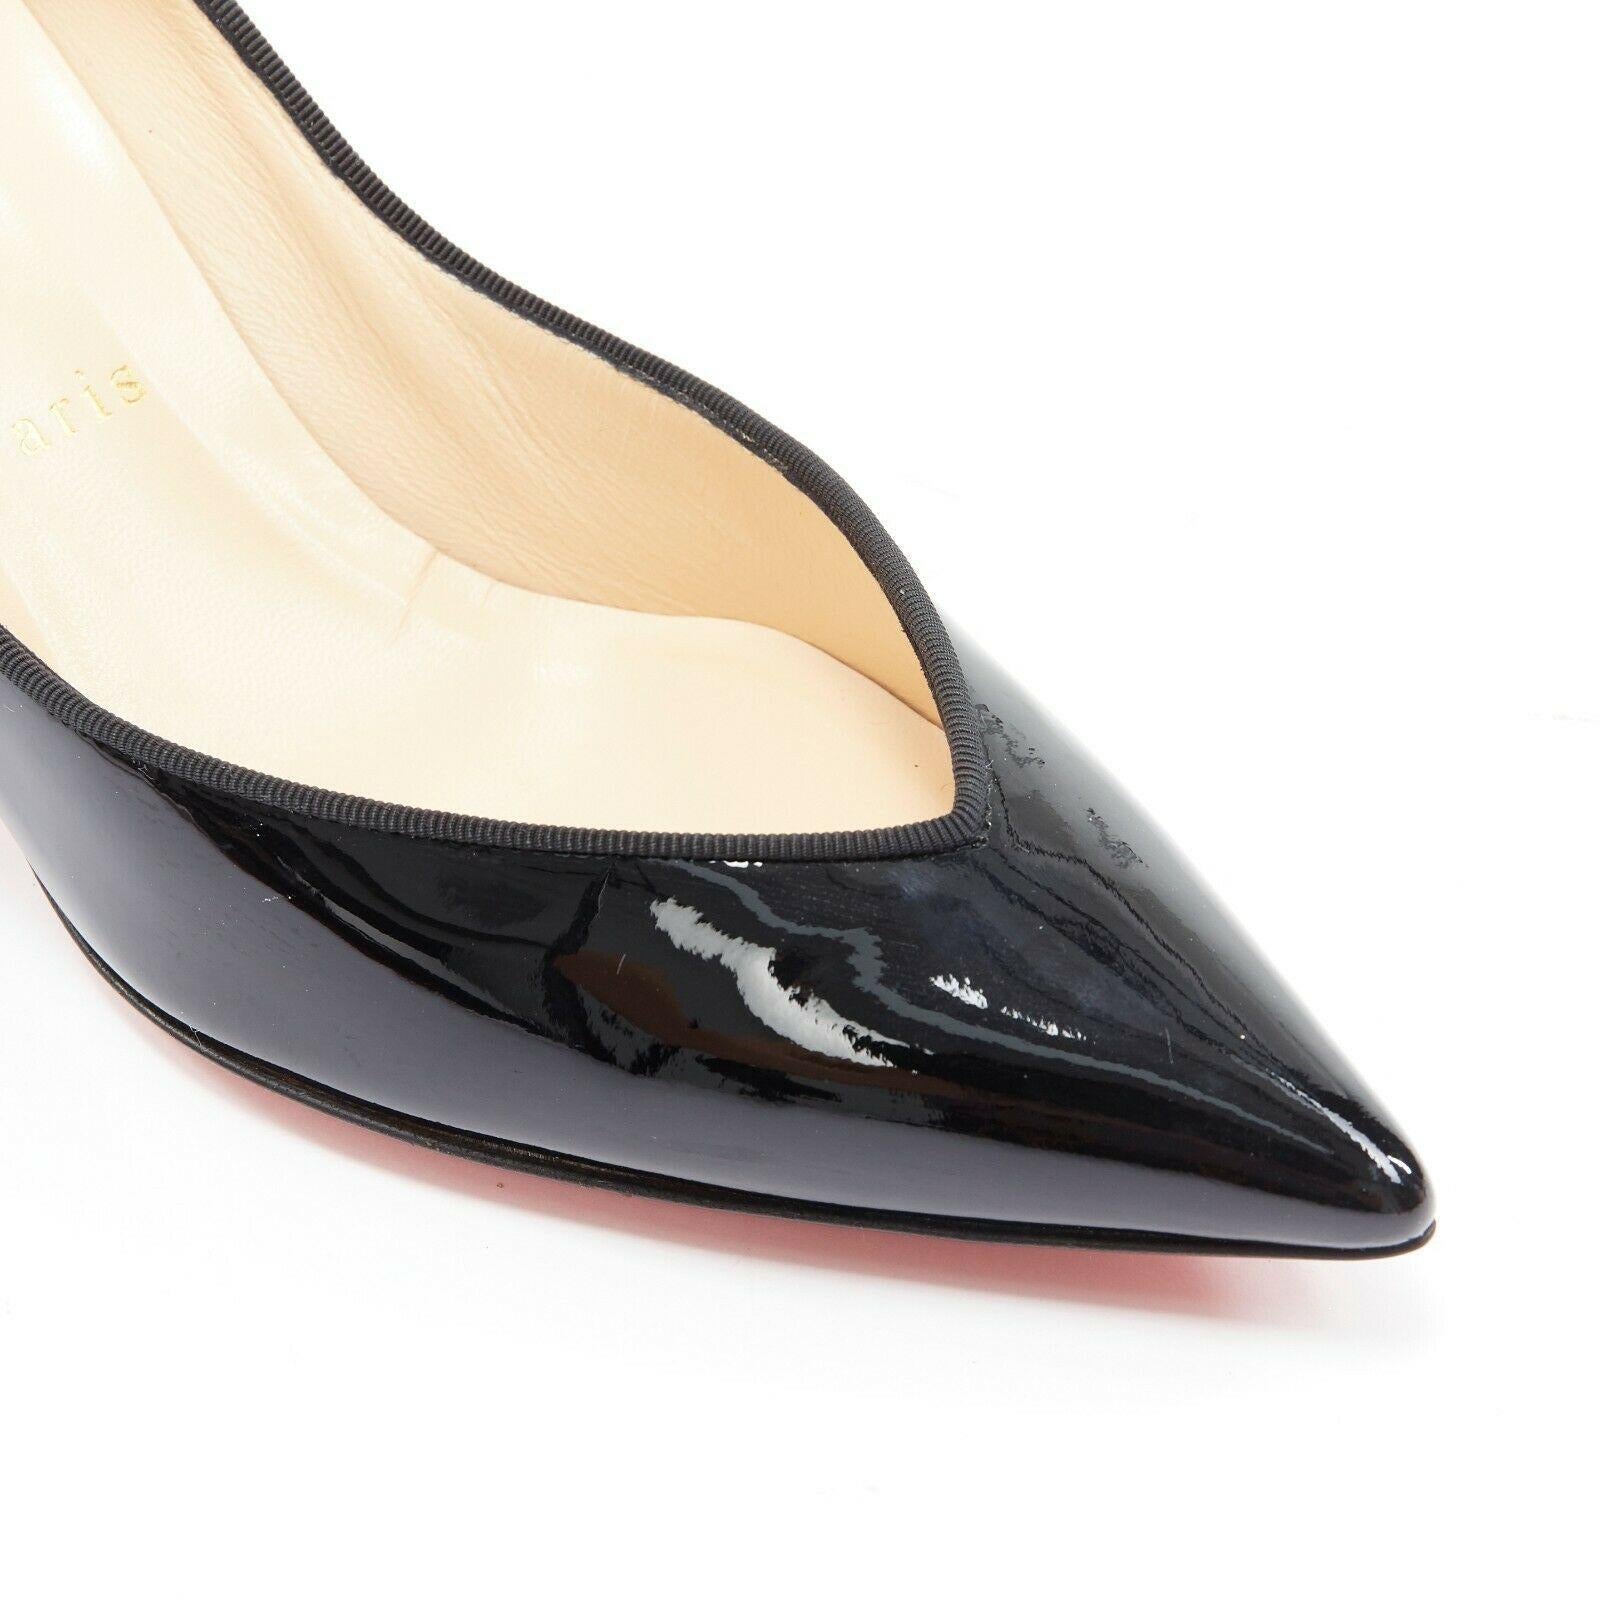 new CHRISTIAN LOUBOUTIN black patent V-neck vamp pointed kitten heel EU37
CHRISTIAN LOUBOUTIN
Black patent leather upper. V-neck vamp. Pointed toe. Tonal stitching. 
Grosgrain trimming along opening. Slim kitten heel. Tan padded leather lining.